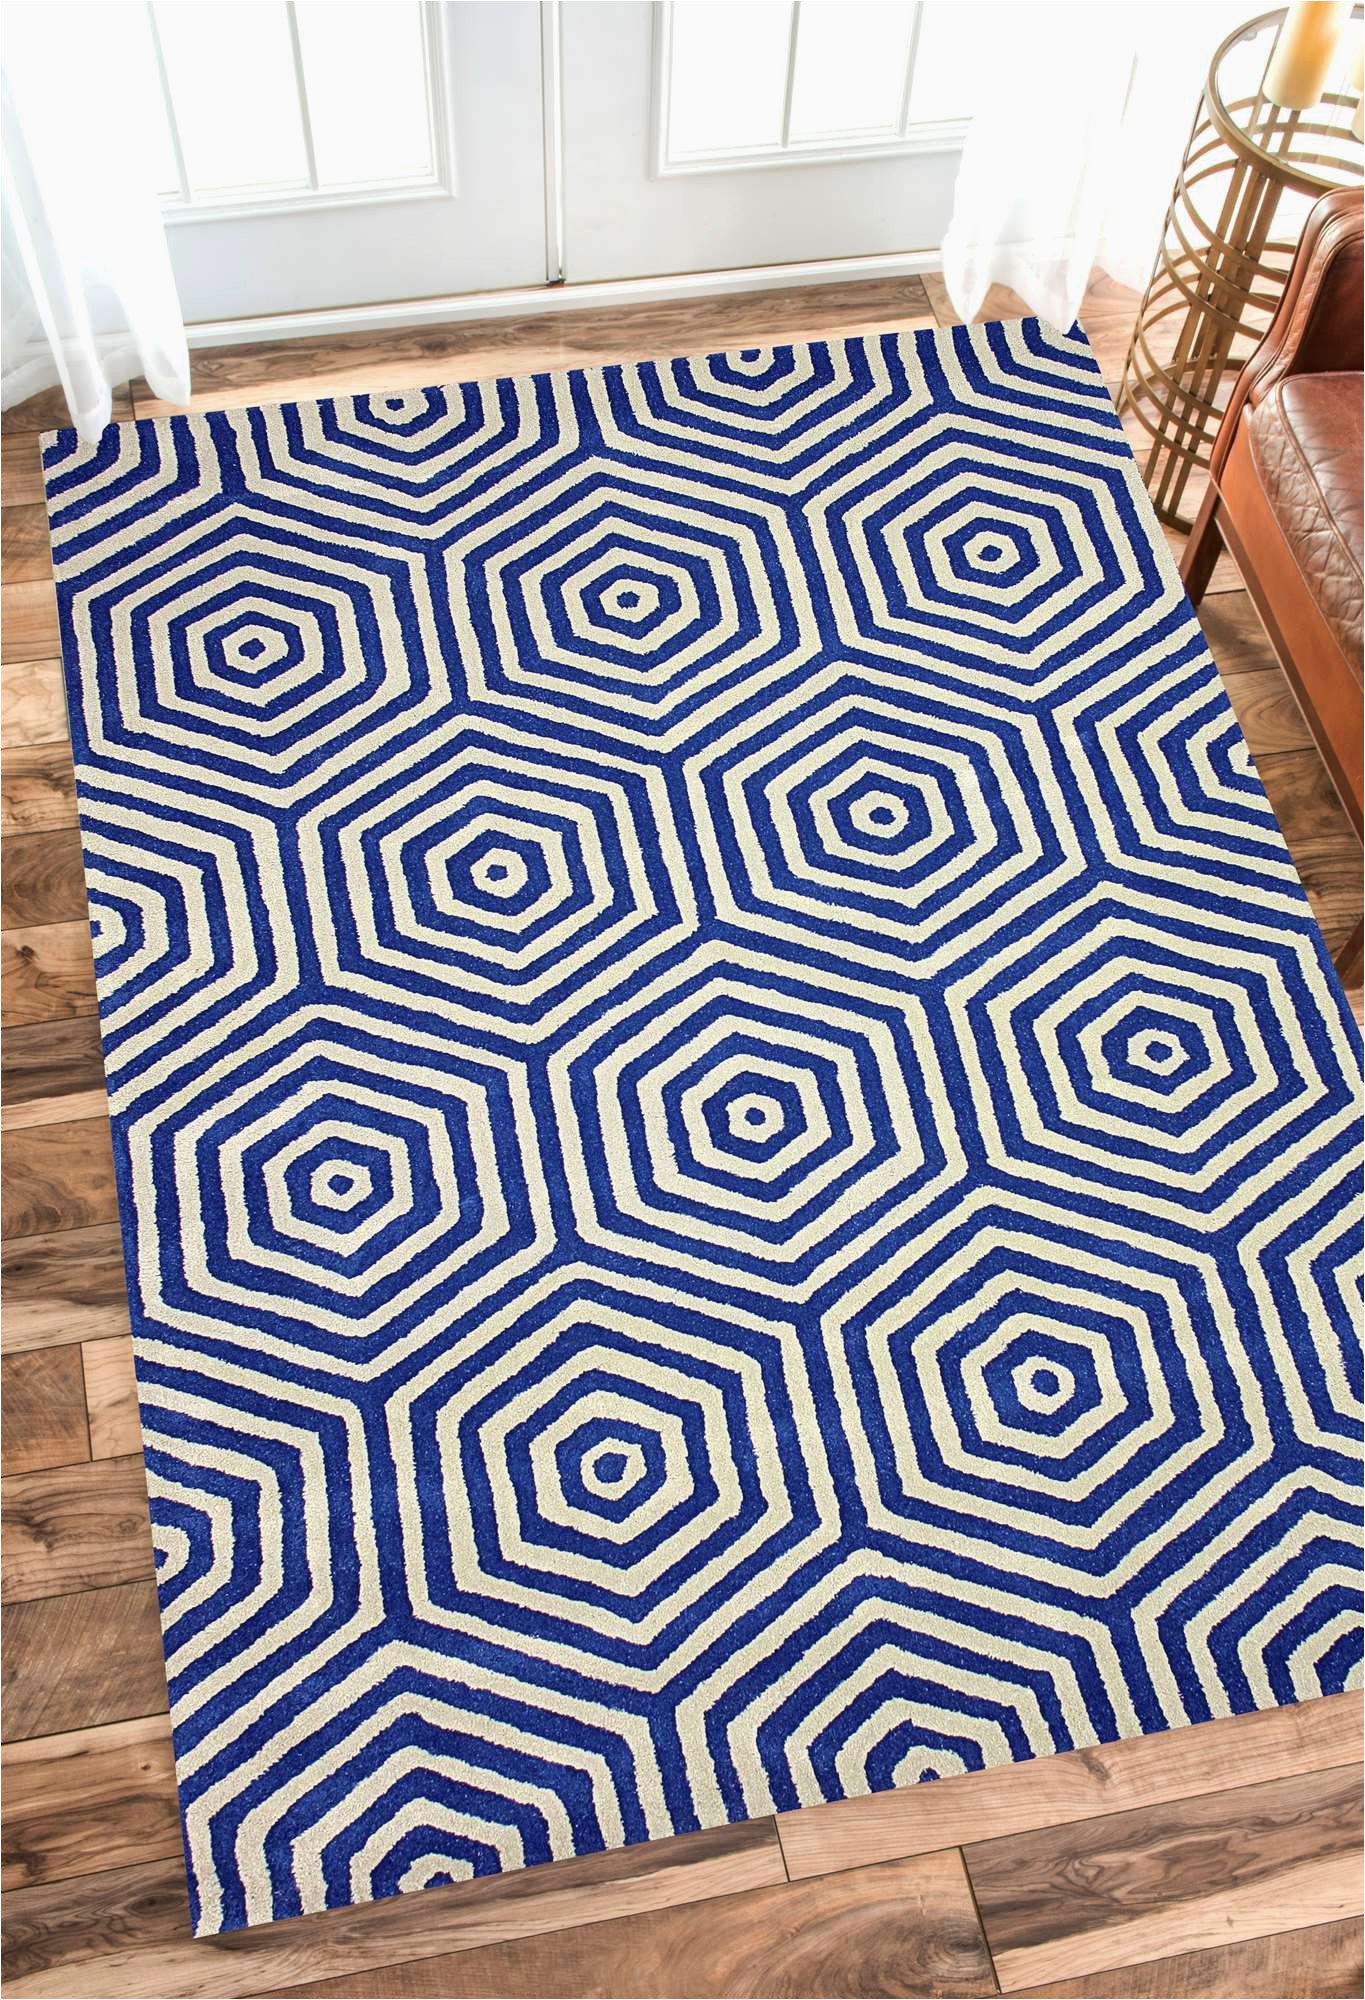 Blue and White Rugs for Sale Pin by Jealynn Bahnmiller On Living Room